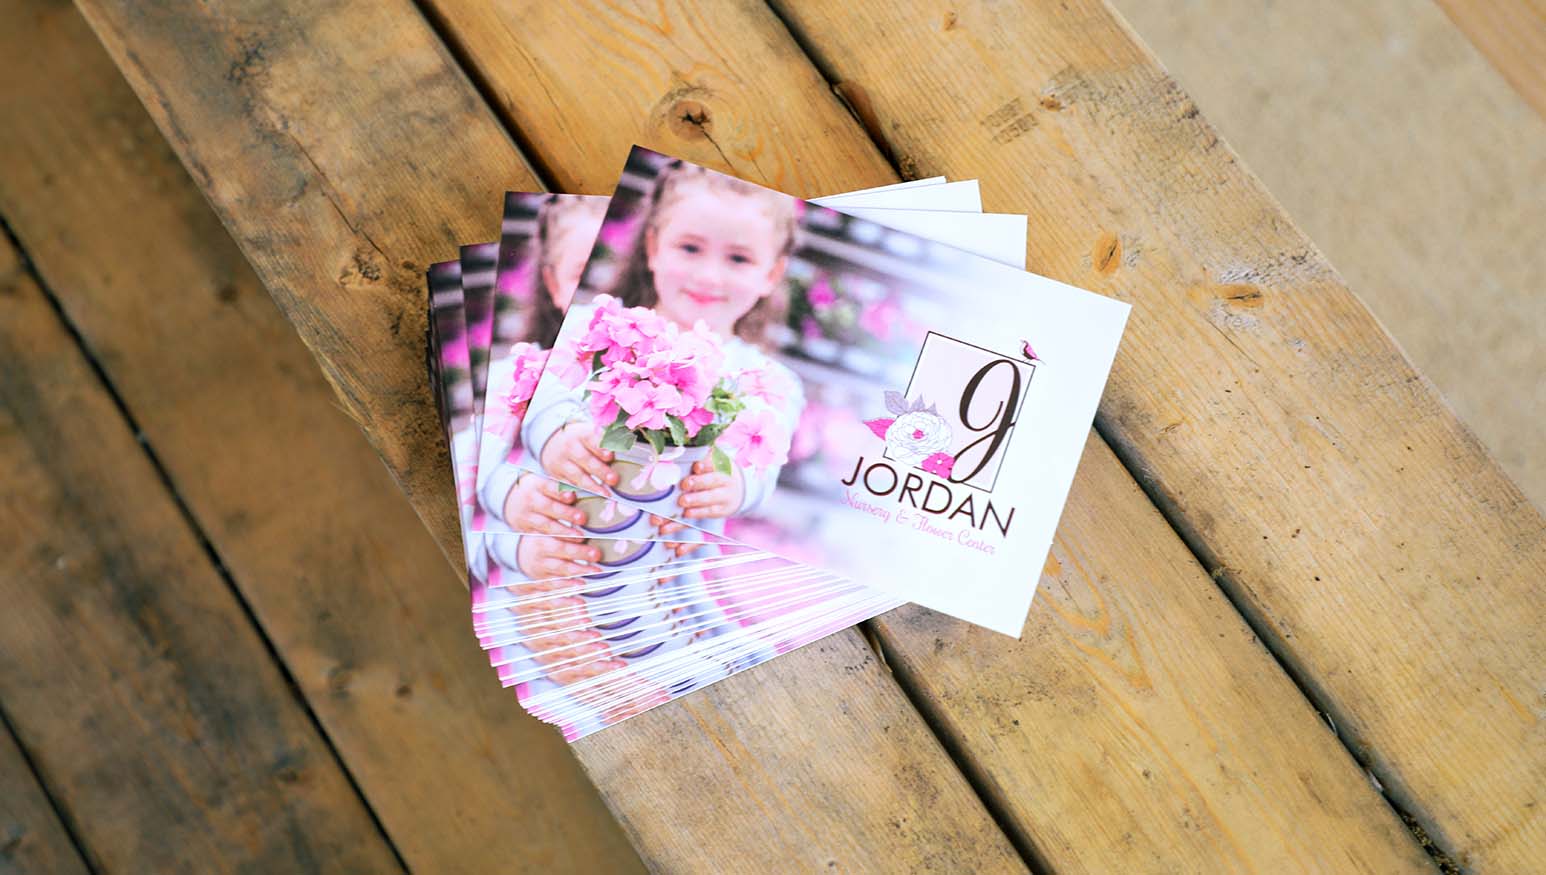 Handing out postcards is one of the most cost-effective ways for brands to reach their target audience. You can raise brand awareness, advertise promotions, and more!